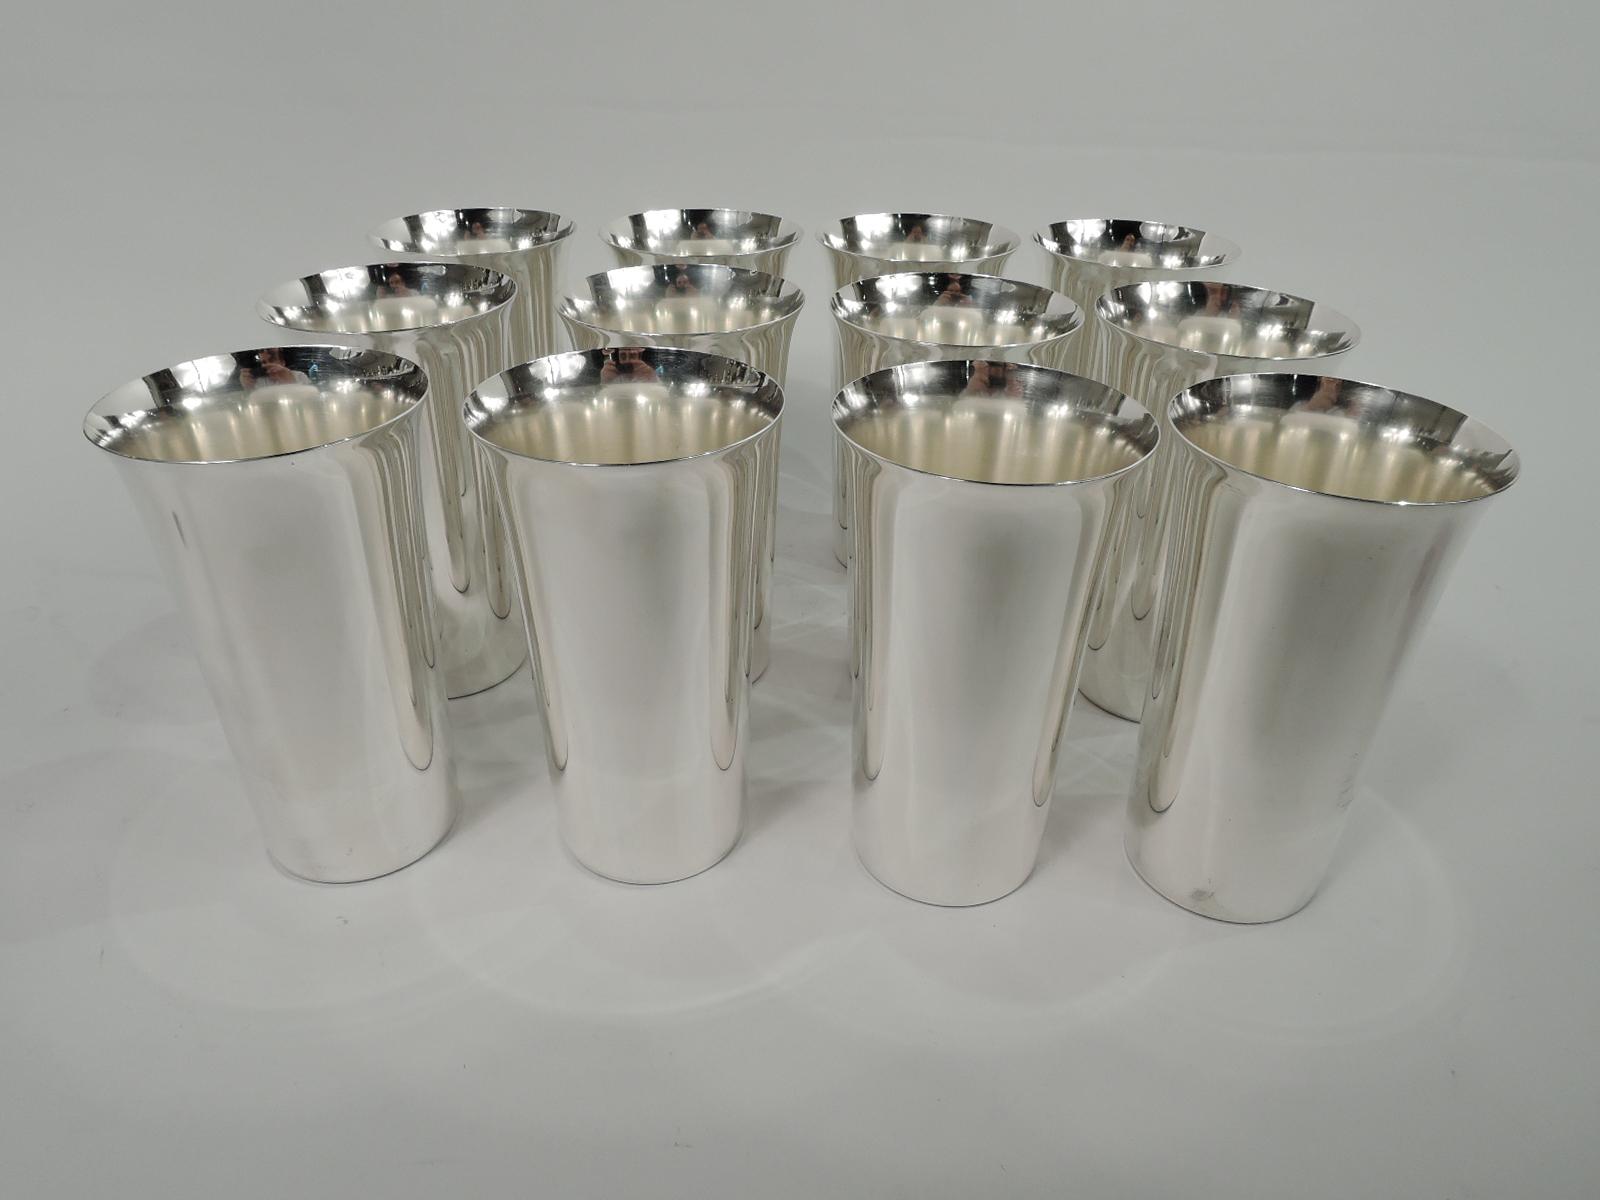 Set of 12 Mid-Century Modern highballs. Made by Manchester in Providence. Each: Straight sides and flared rim. Nice easy-grip form. Fully marked including maker’s stamp and no. 821. Total weight: 52 troy ounces.